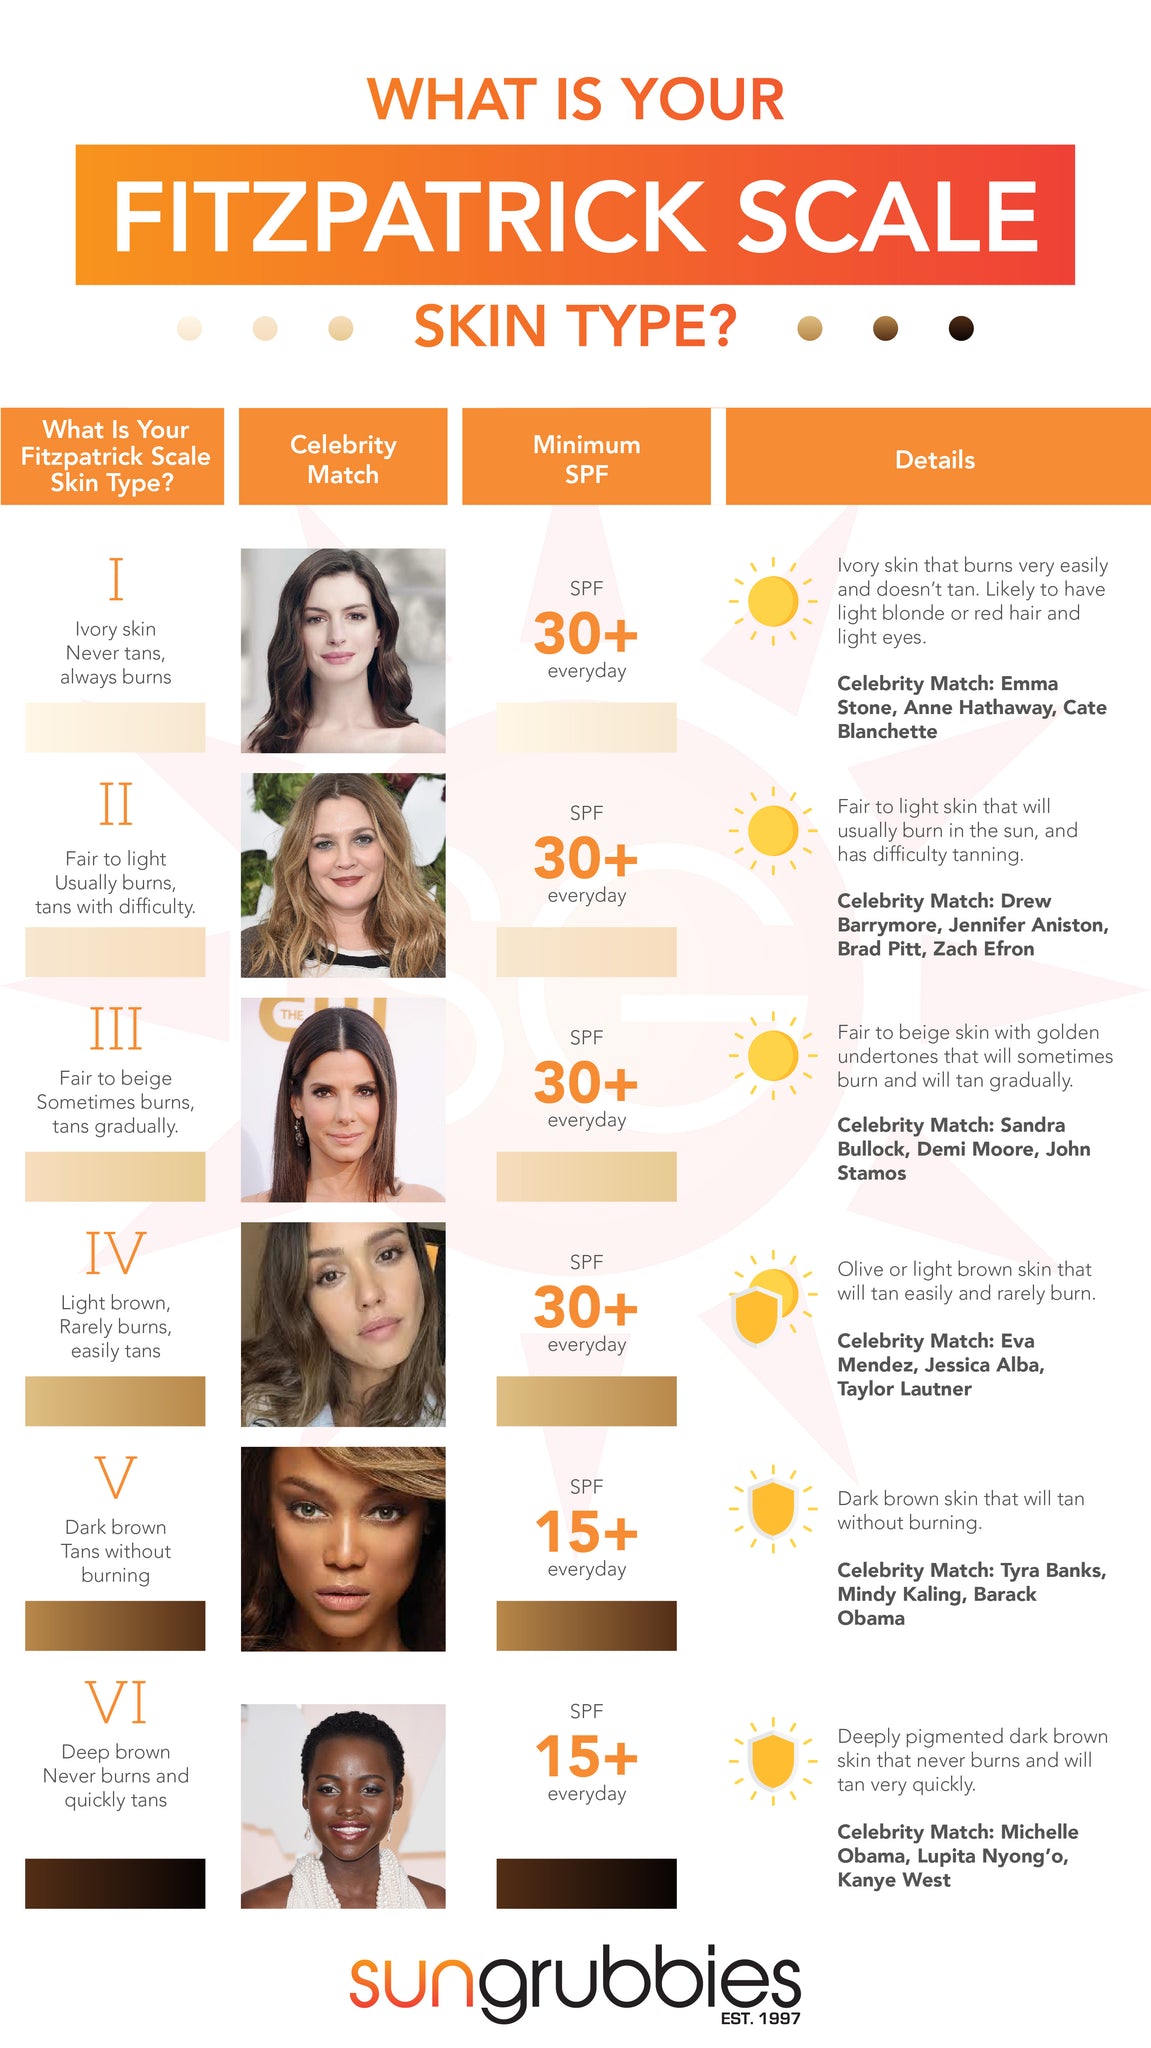 Fitzpatrick Scale For different Skin Types - Understanding skin damage ...